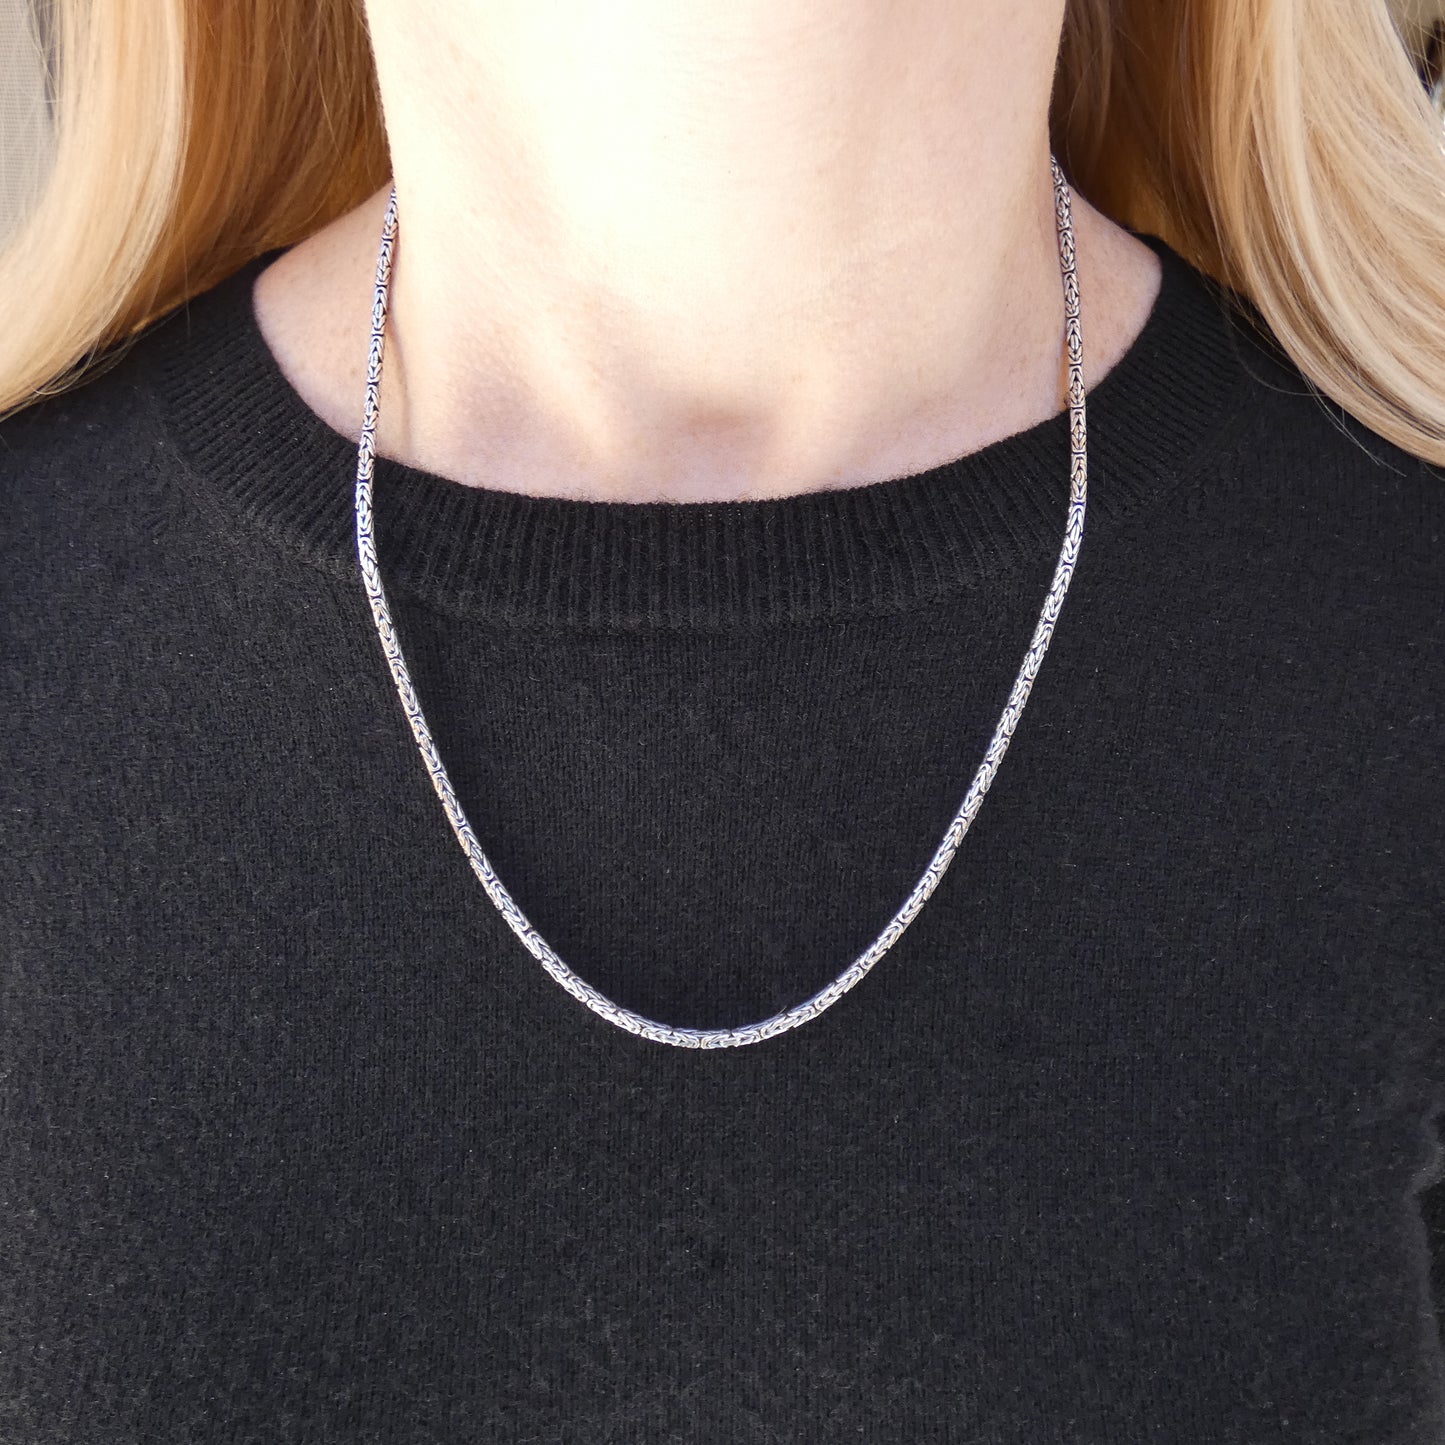 Woman wearing a silver byzantine chain necklace.